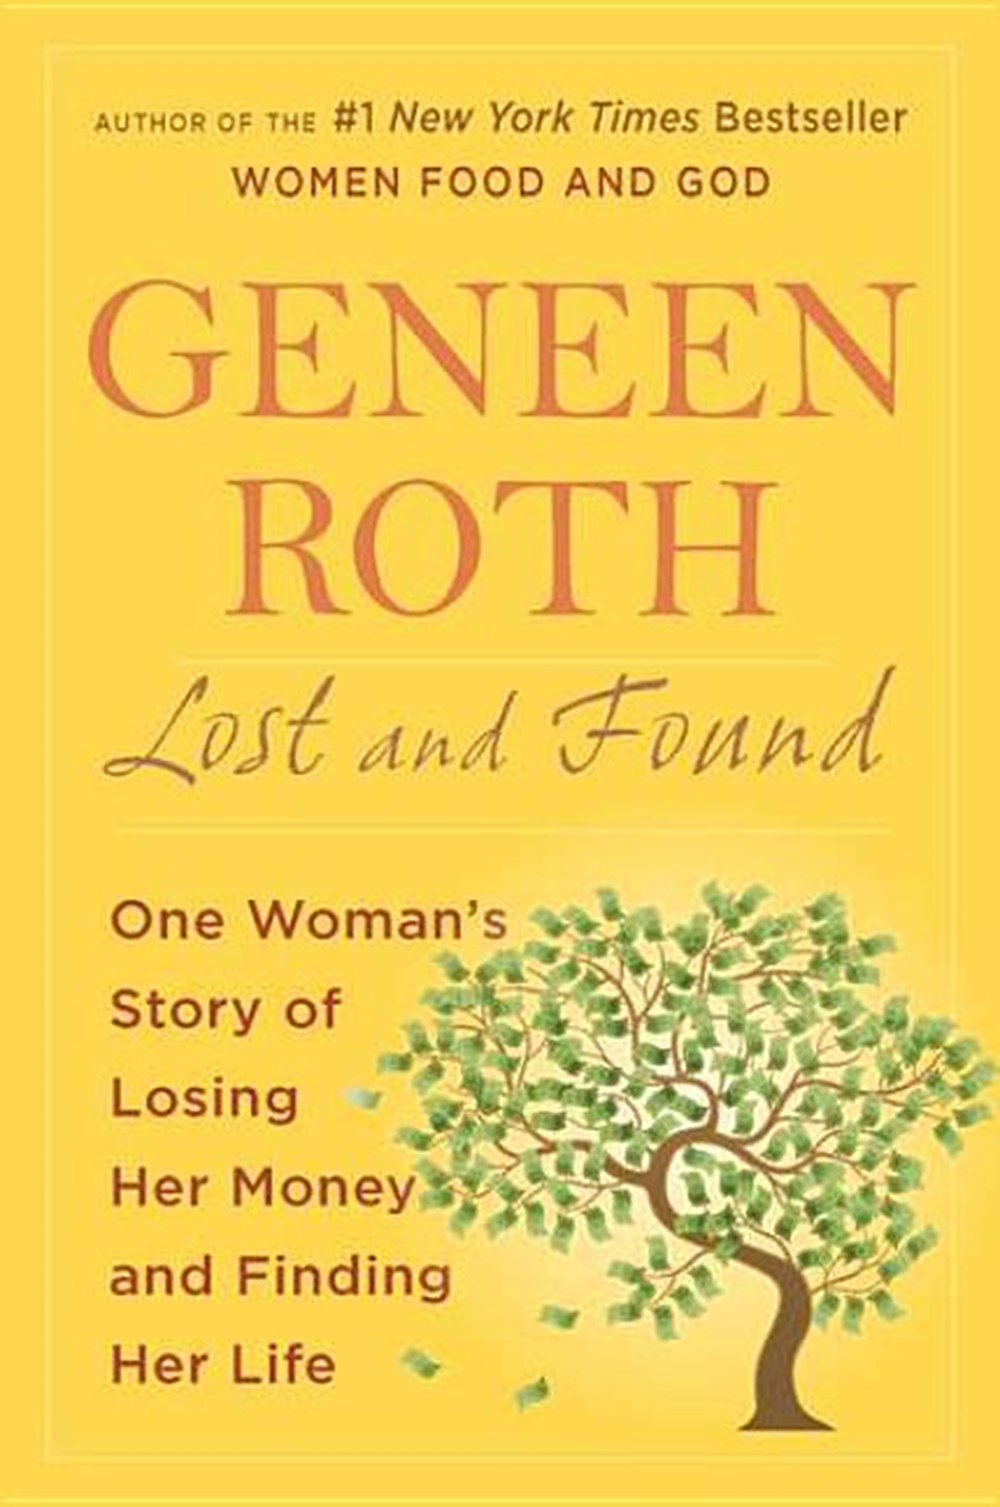 Lost and Found One Woman's Story of Losing Her Money and Finding Her Life